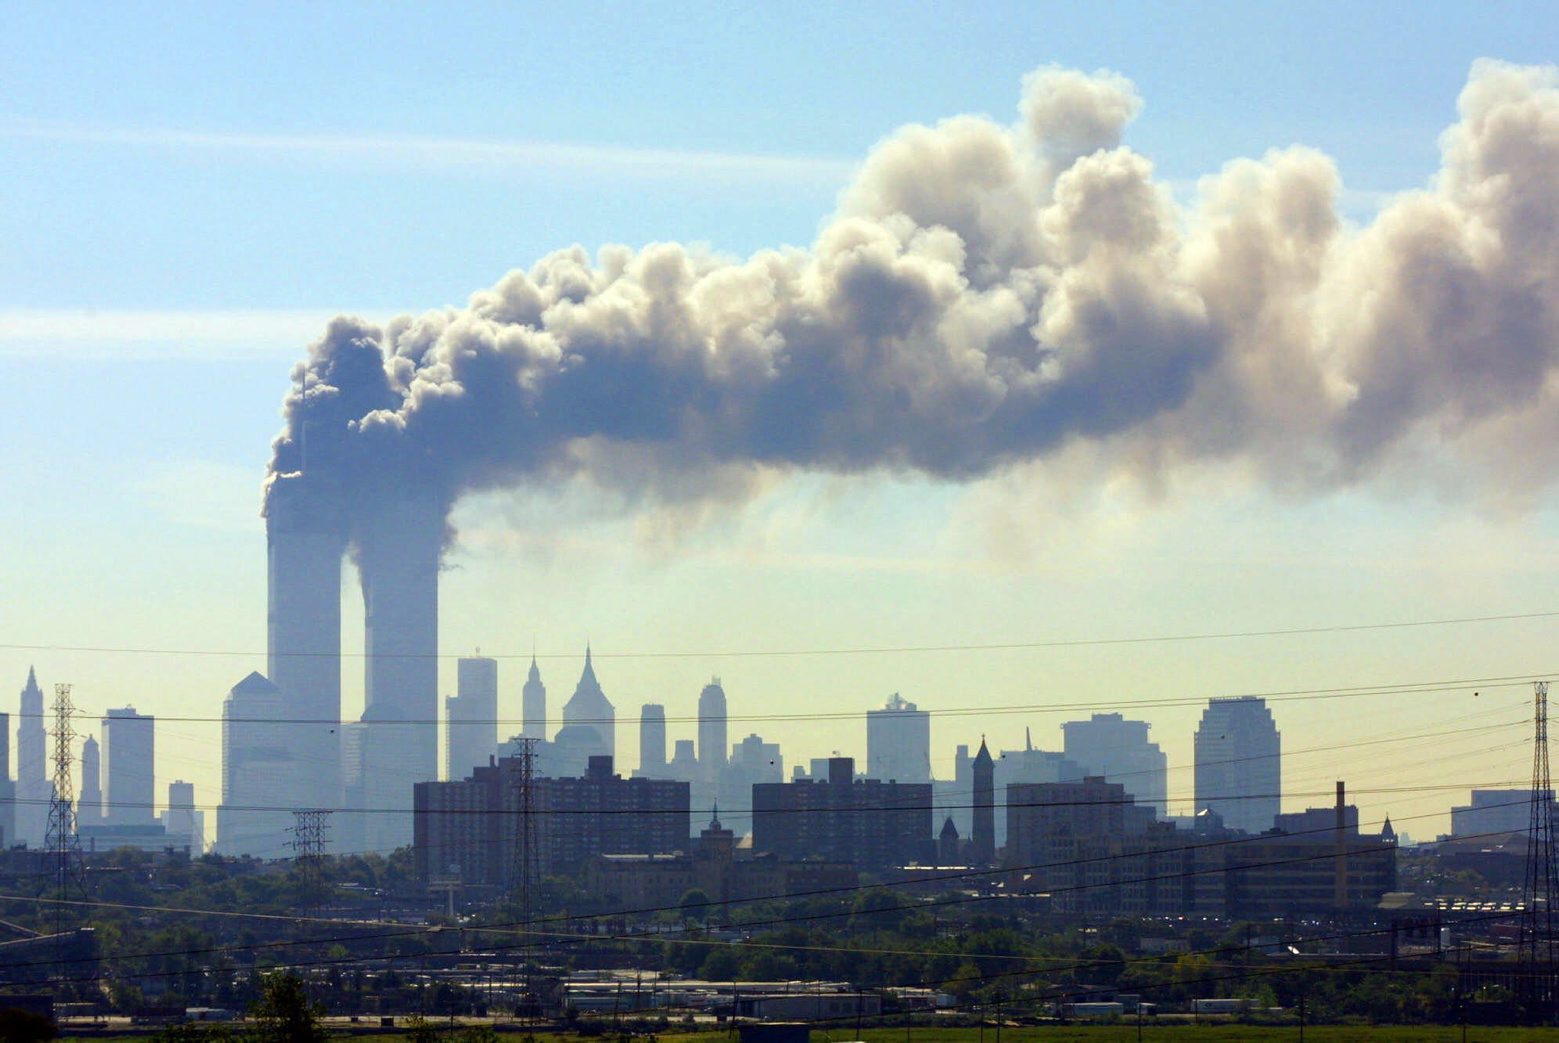 FILE - In this Sept. 11, 2001 file photo, as seen from the New Jersey Turnpike near Kearny, N.J., smoke billows from the twin towers of the World Trade Center in New York after airplanes crashed into both towers.   Families of the victims of the worst terror attack on the United States in history gathered Wednesday, Sept. 11, 2013,  to mark their 12th anniversary with a moment of silence and the reading of names.  The Sept. 11, 2001 attacks in New York City and Washington killed almost 3,000 people and lead to a war in Afghanistan.  (AP Photo/Gene Boyars) Sept 11 Anniversary Photo Gallery